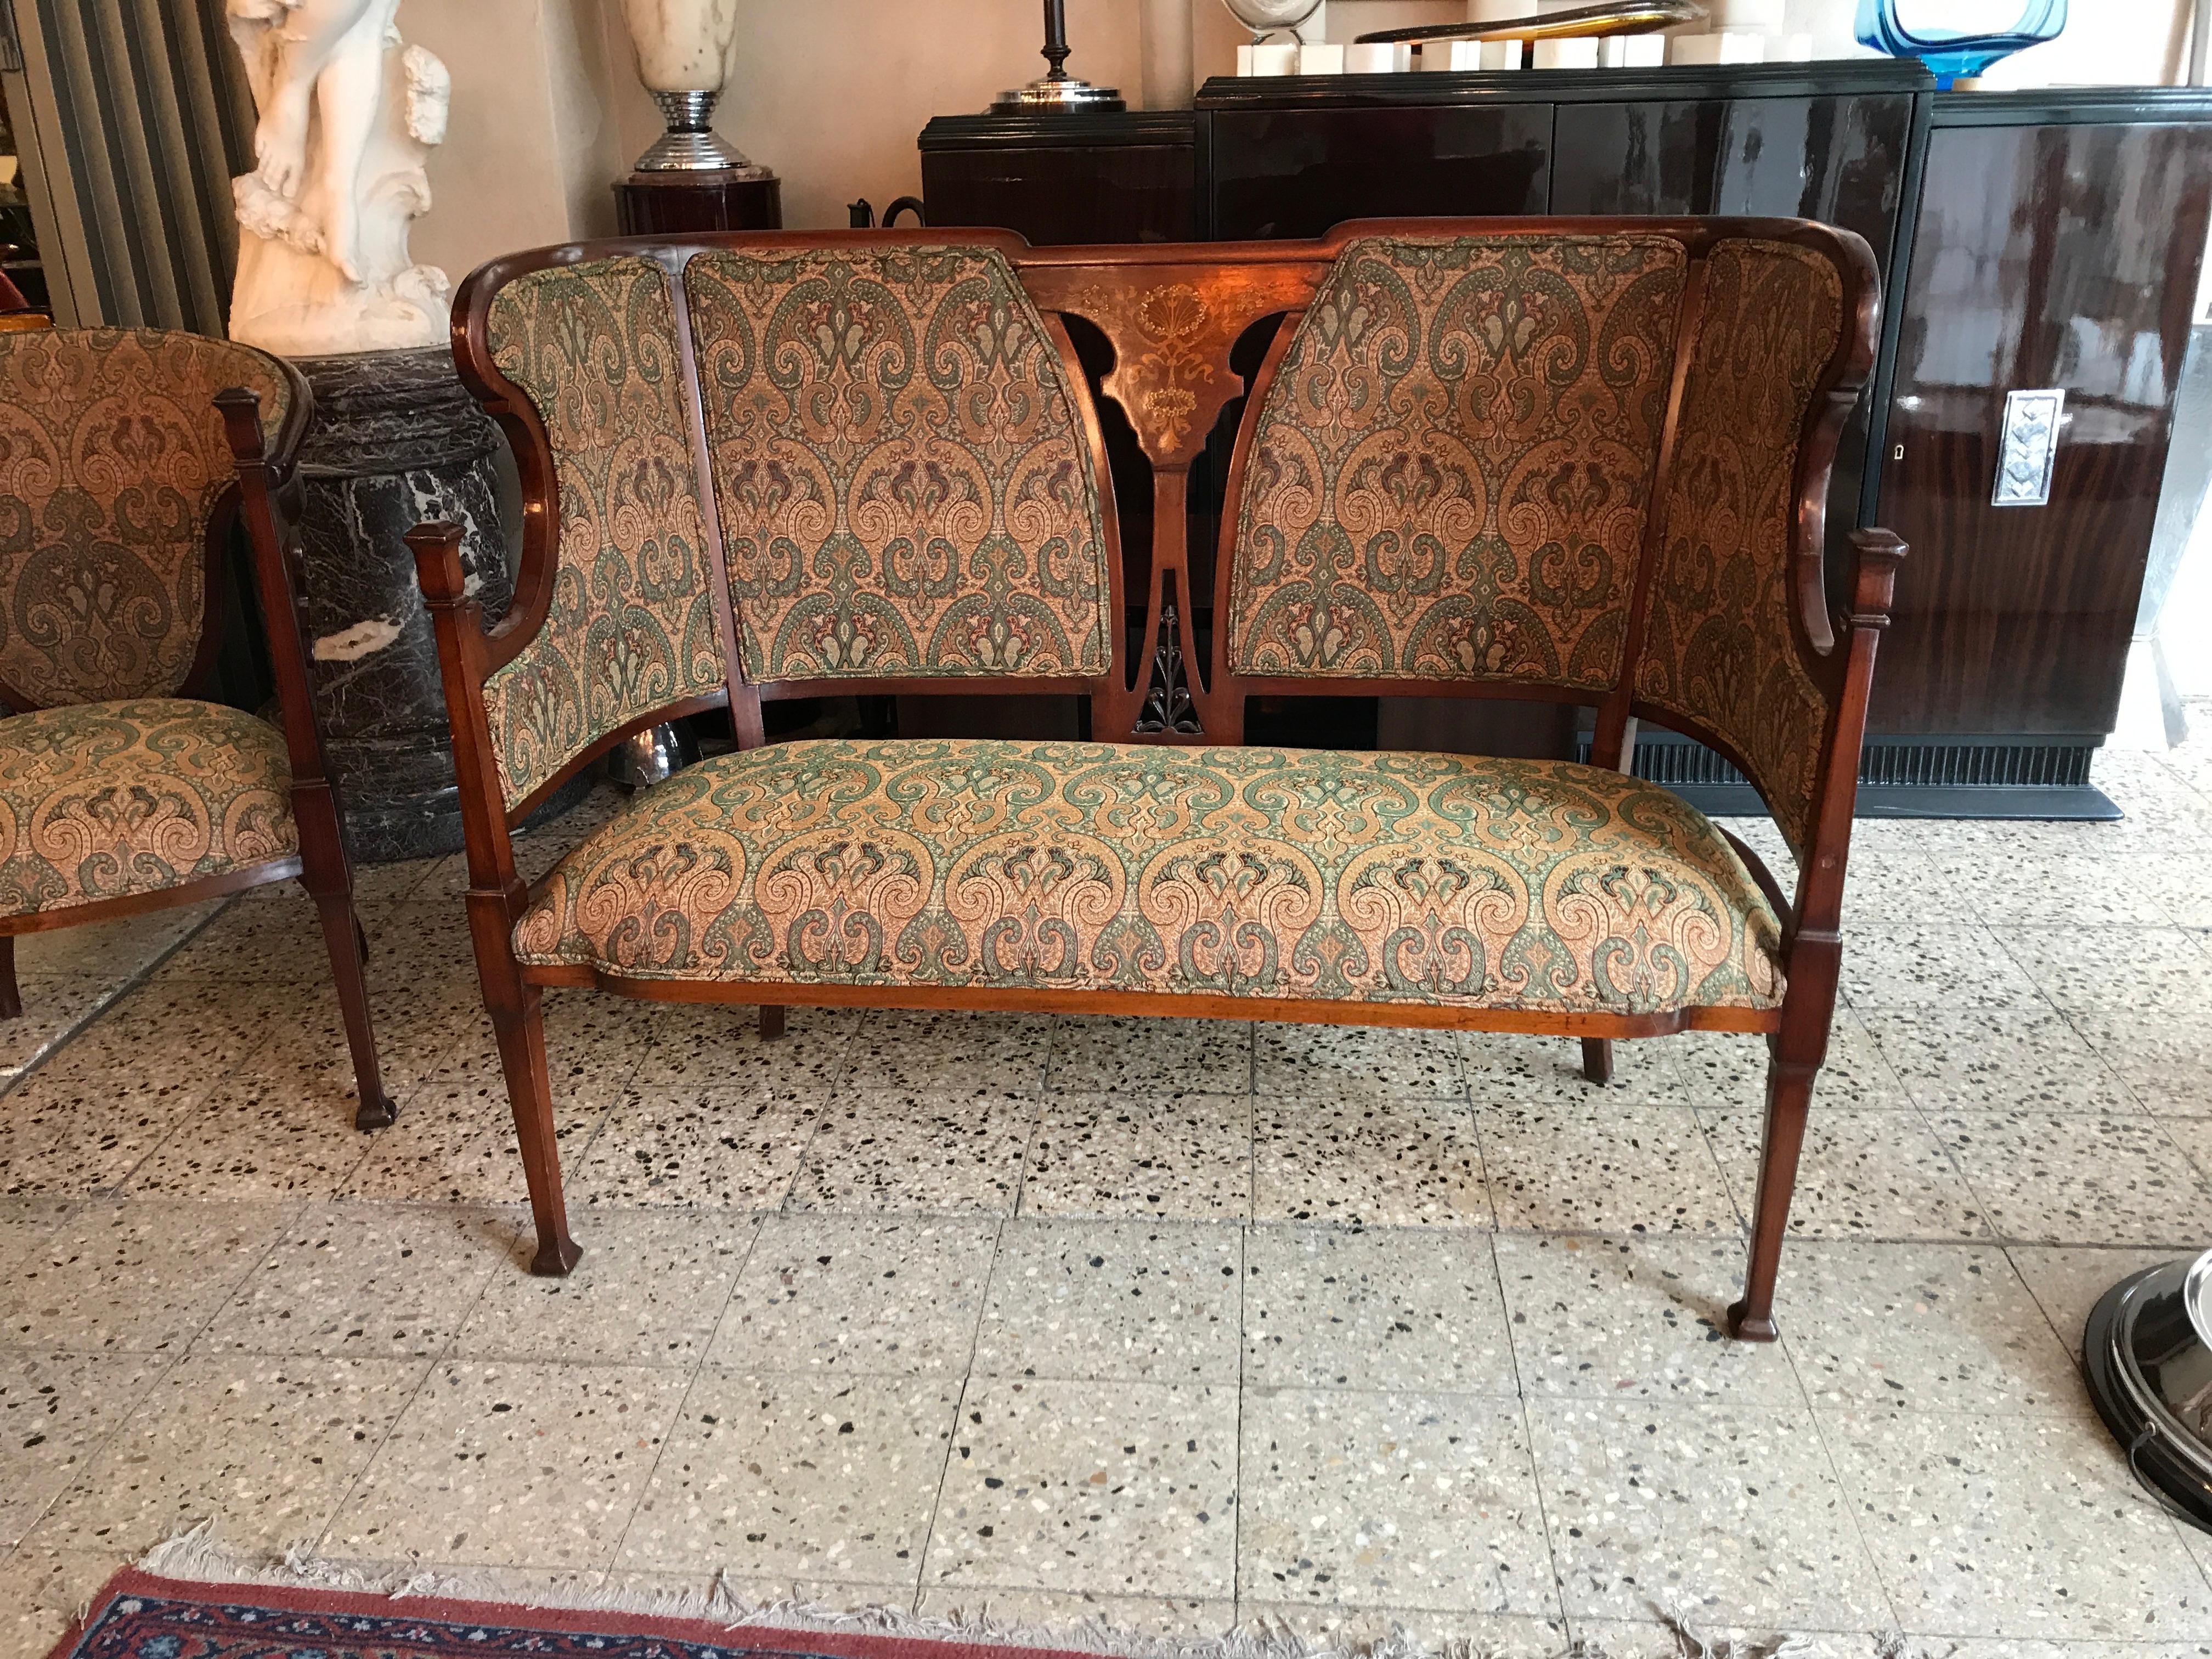 Incredible Art Nouveau Game.

1 Sofa
2 Armchairs
4 chairs
Material: Wood, reupholstered with springs and elastic band (as it was in the old days)
Country: England
If you have any questions we are at your disposal.
Pushing the button that reads 'View